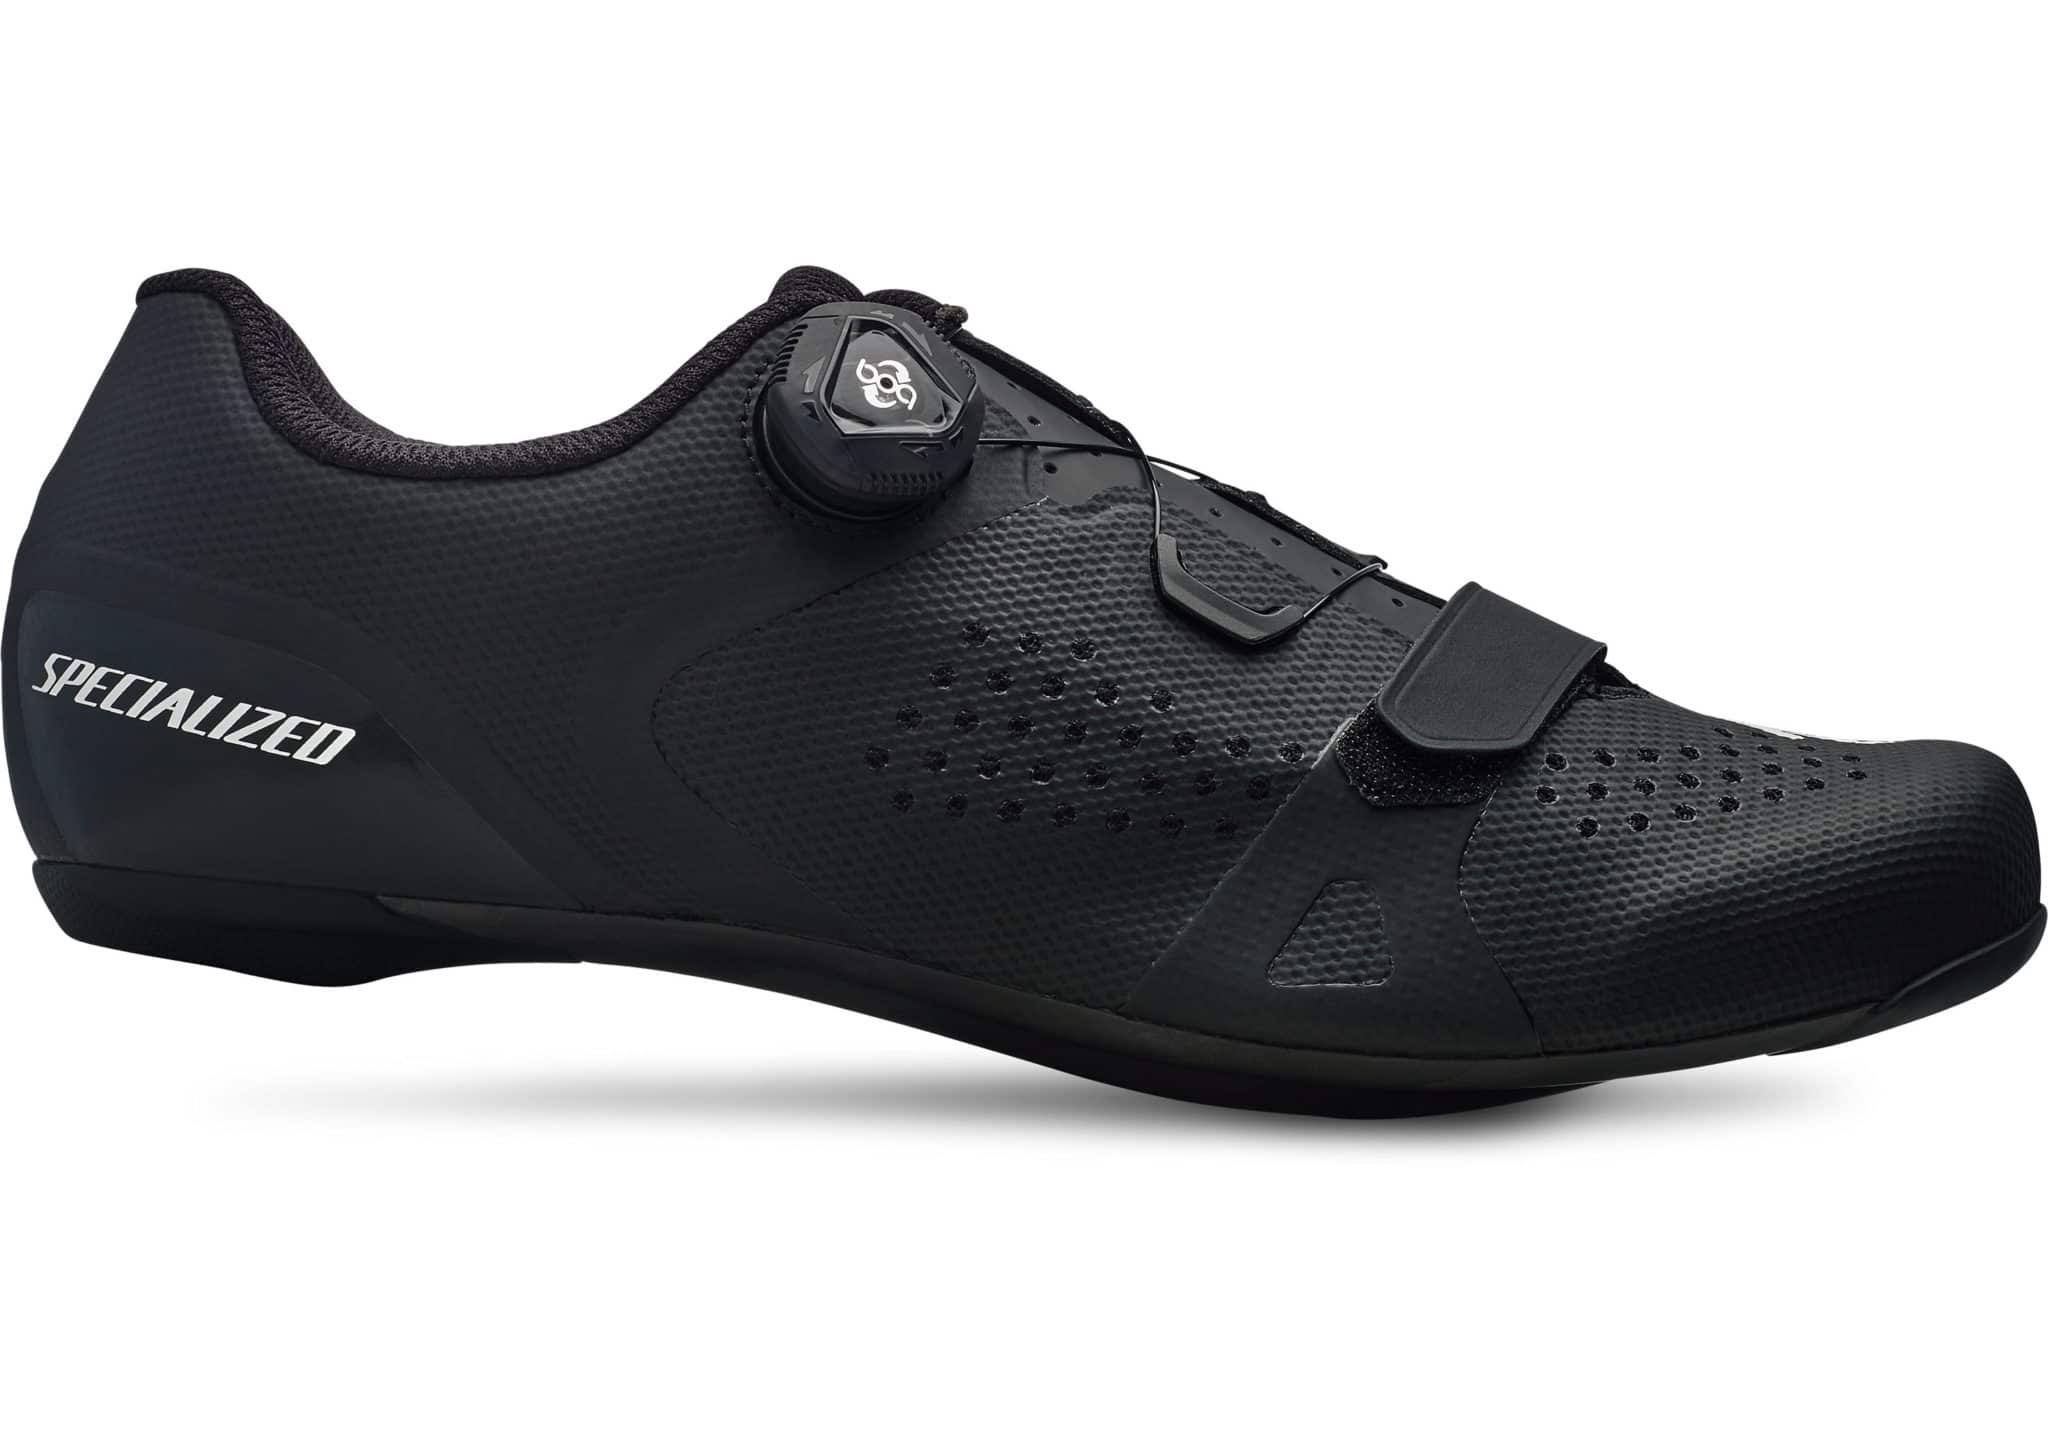 Specialized Torch 2.0 Road Shoes - Black, Size 44